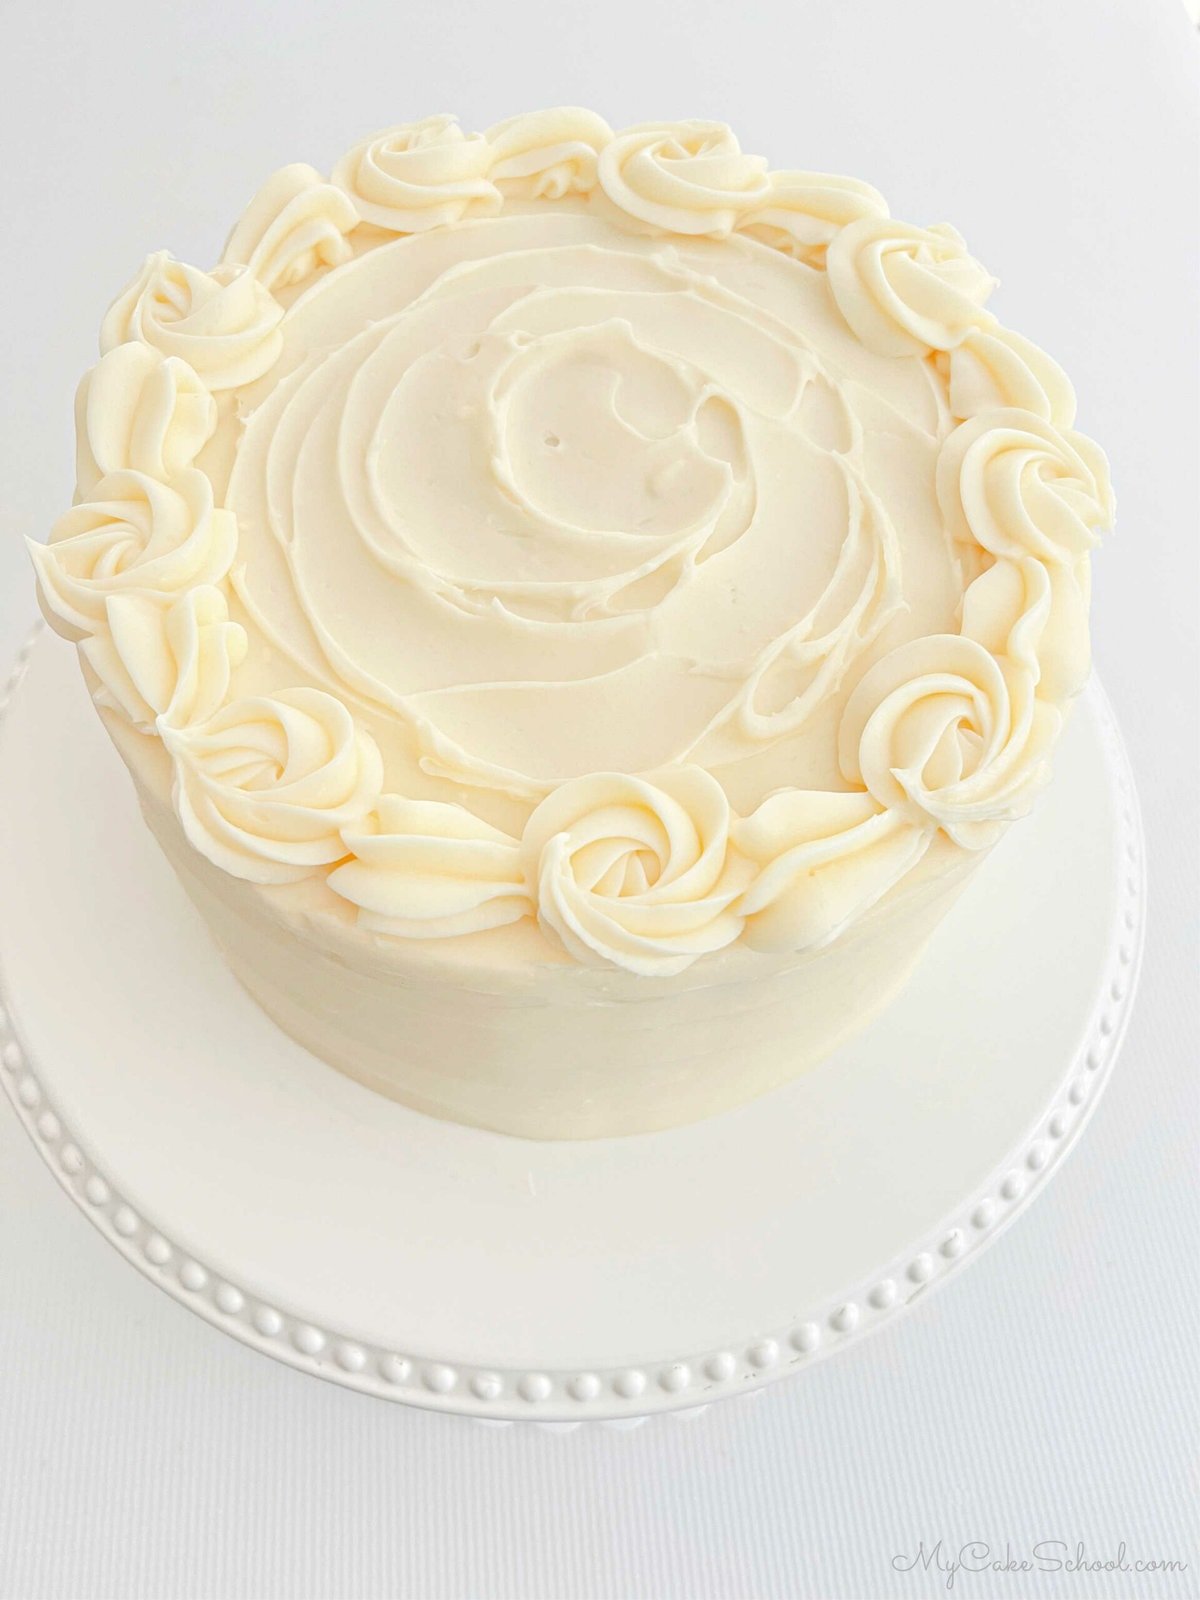 Top view of the frosted Orange Cake, which is decorated with a border of piped buttercream rosettes and shells.